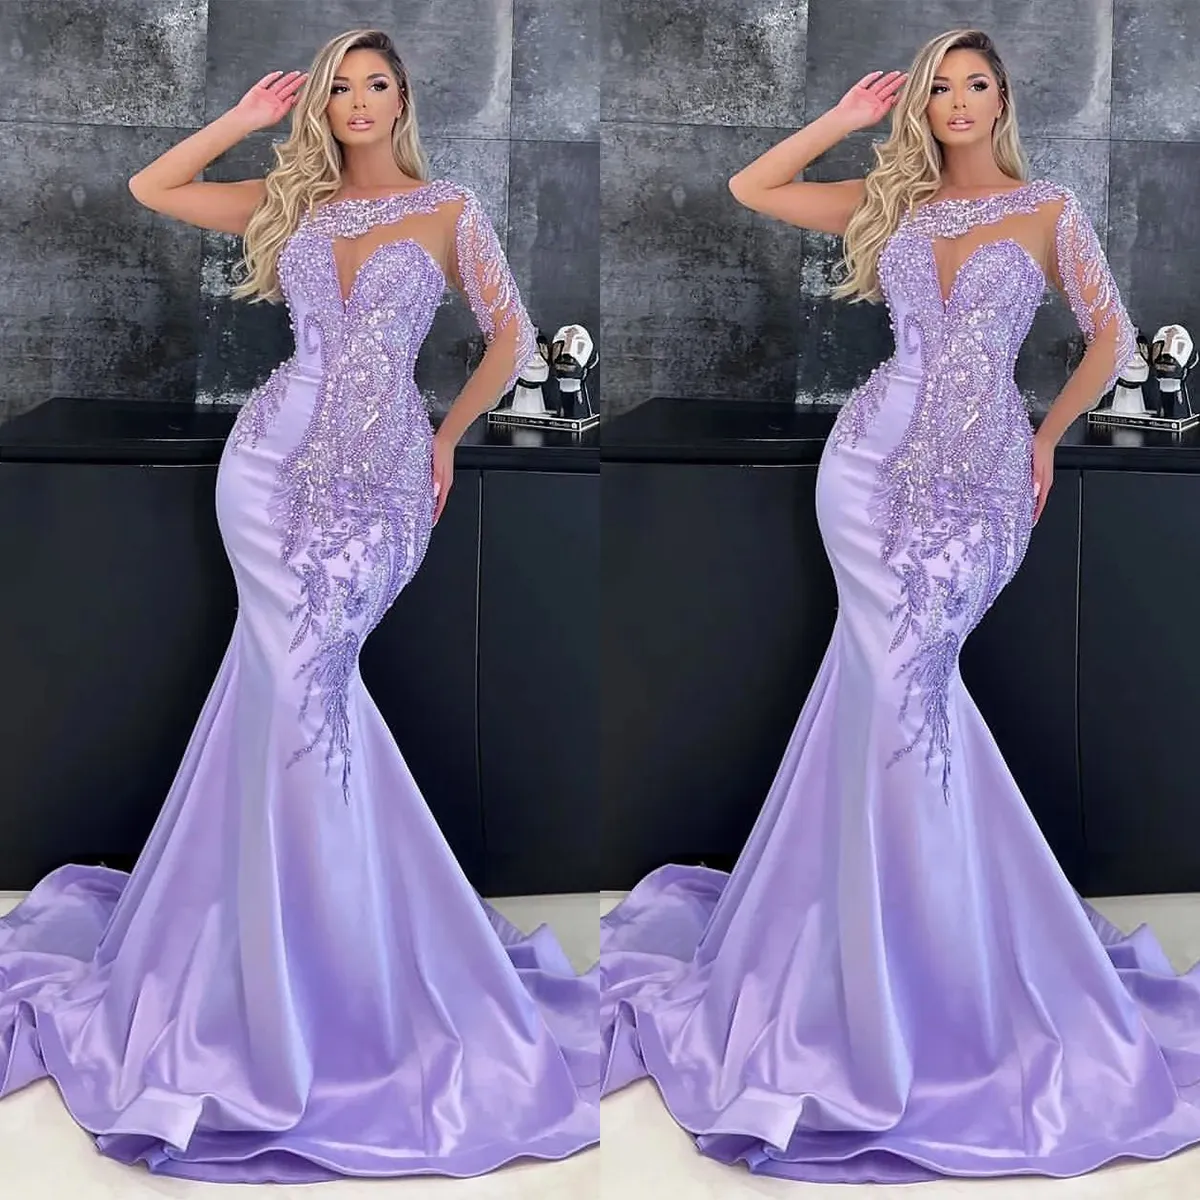 Exquisite One Shoulder Mermaid Evening Dresses Pearls Sequined Prom Dress Long Sleeves Plus Size Custom Made Special Occasion Dresses